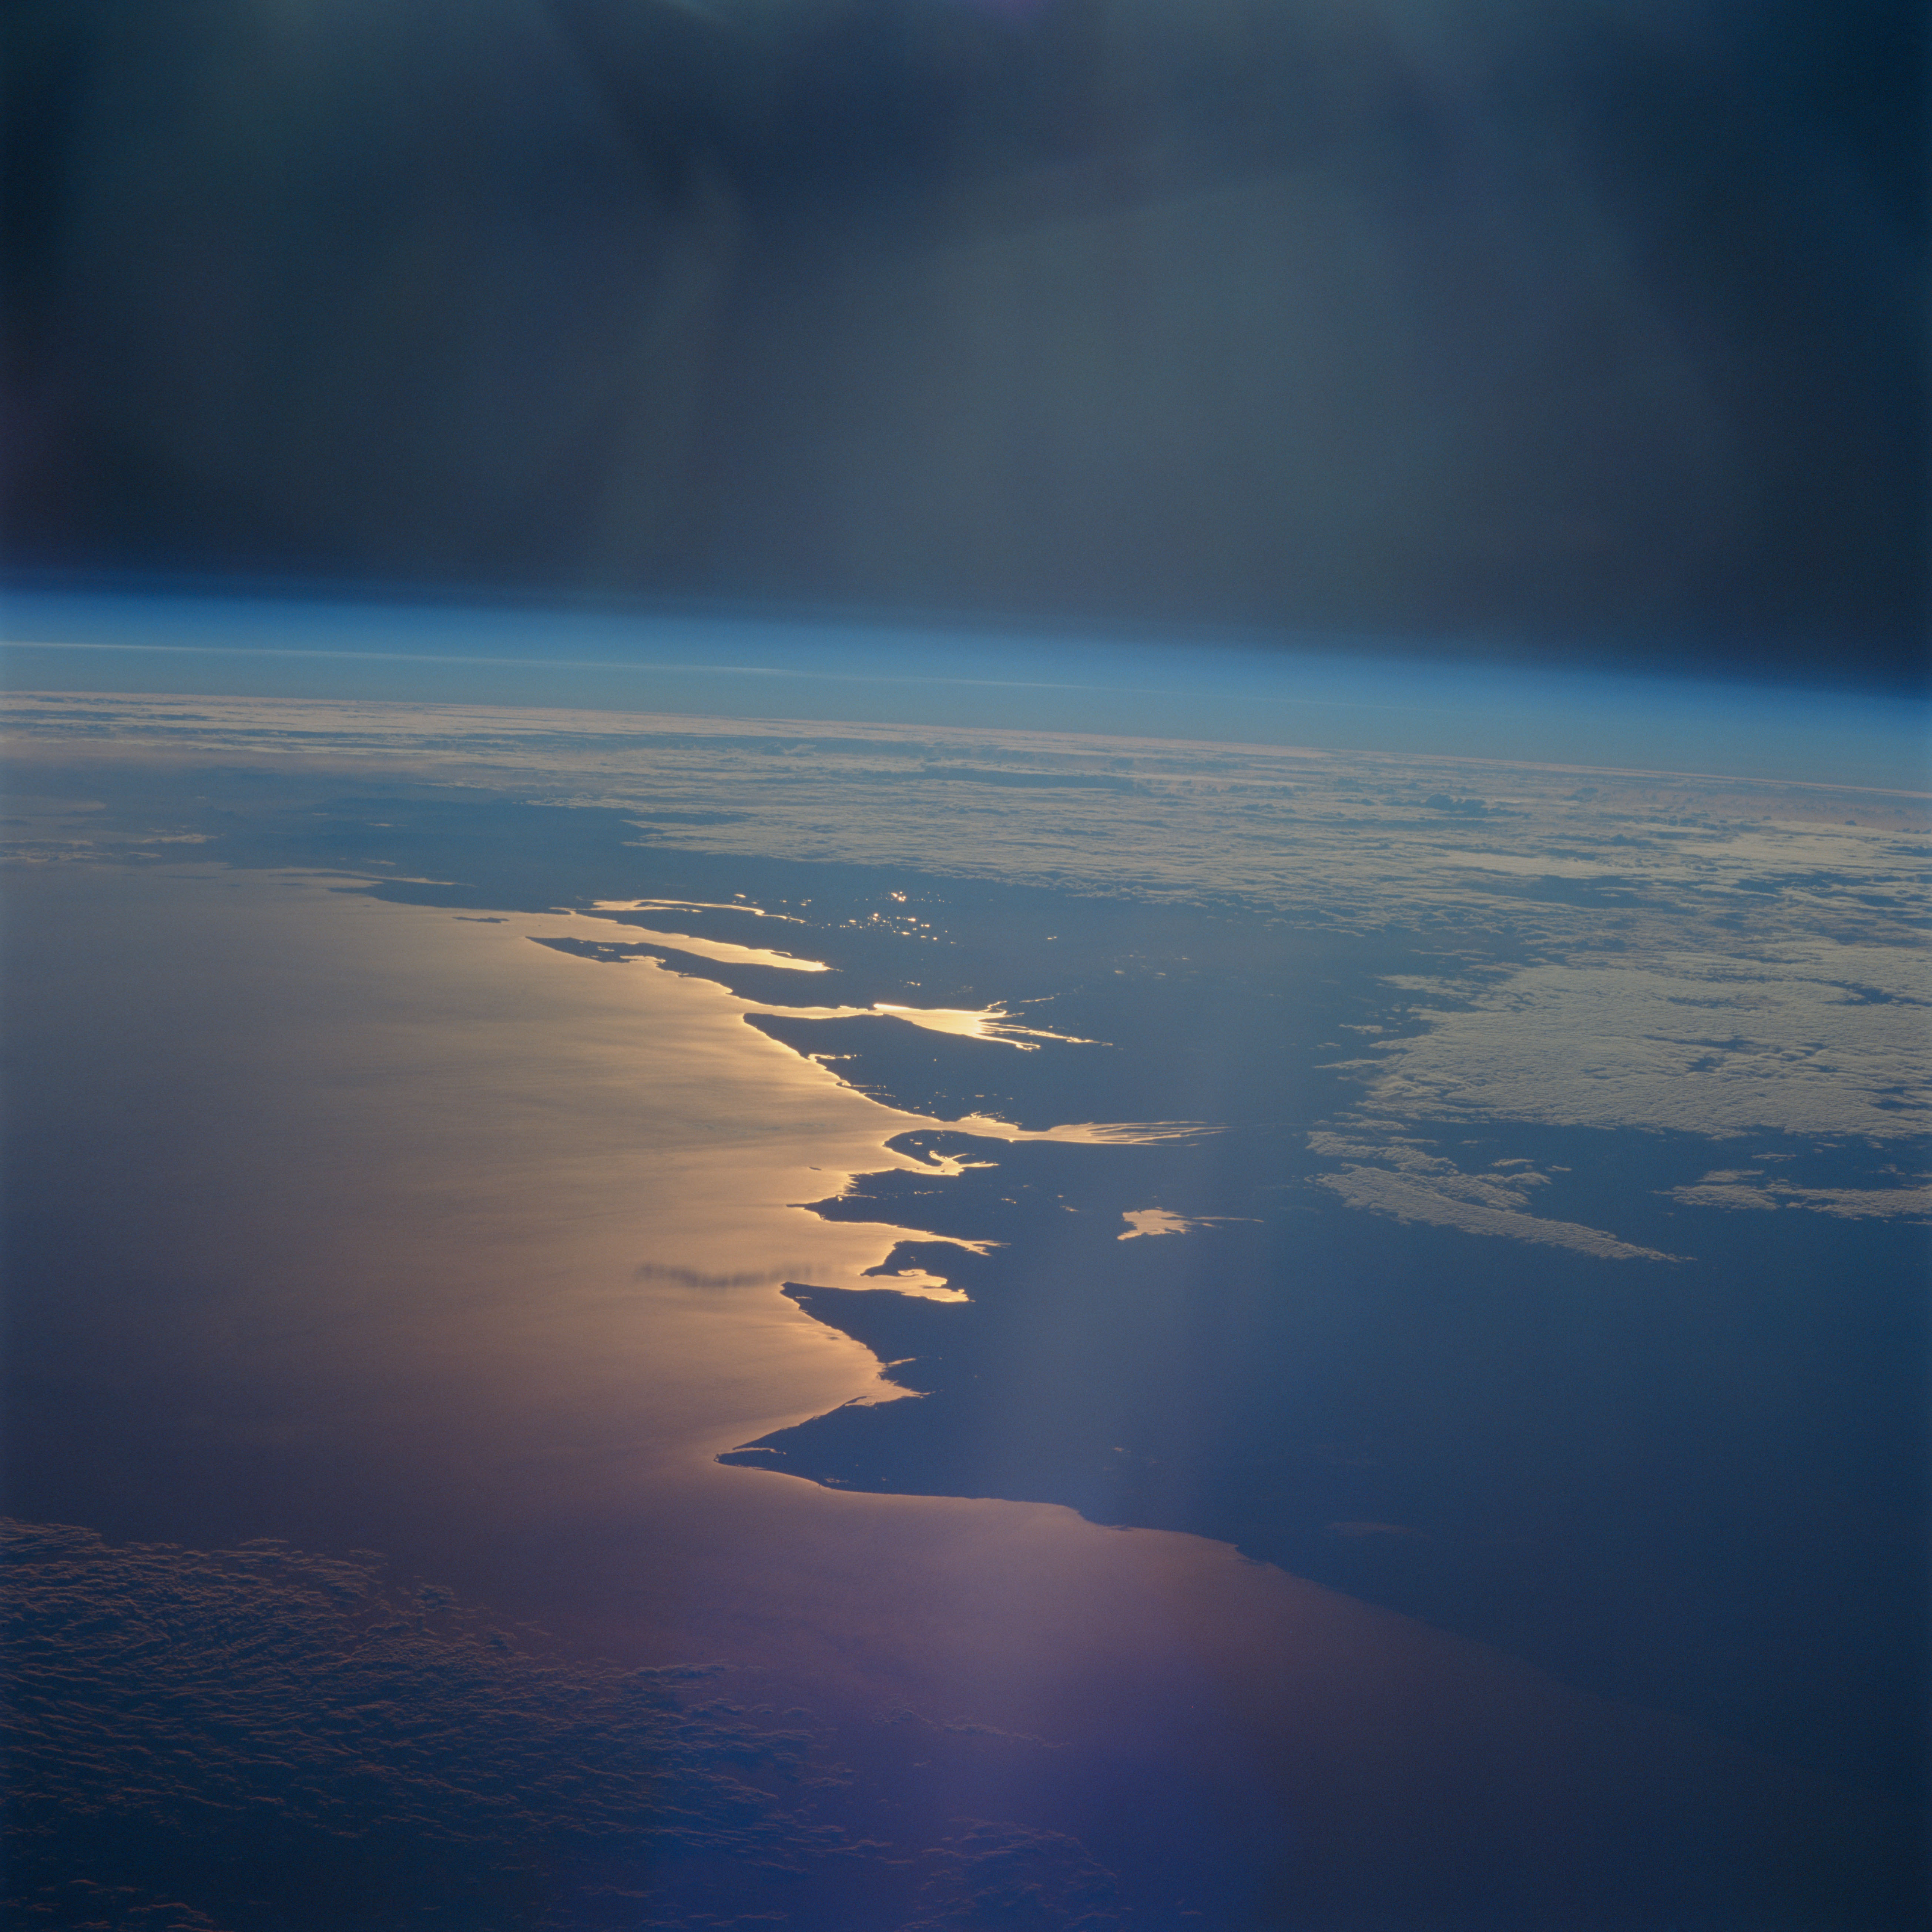 Sunrise over the Mozambique Channel